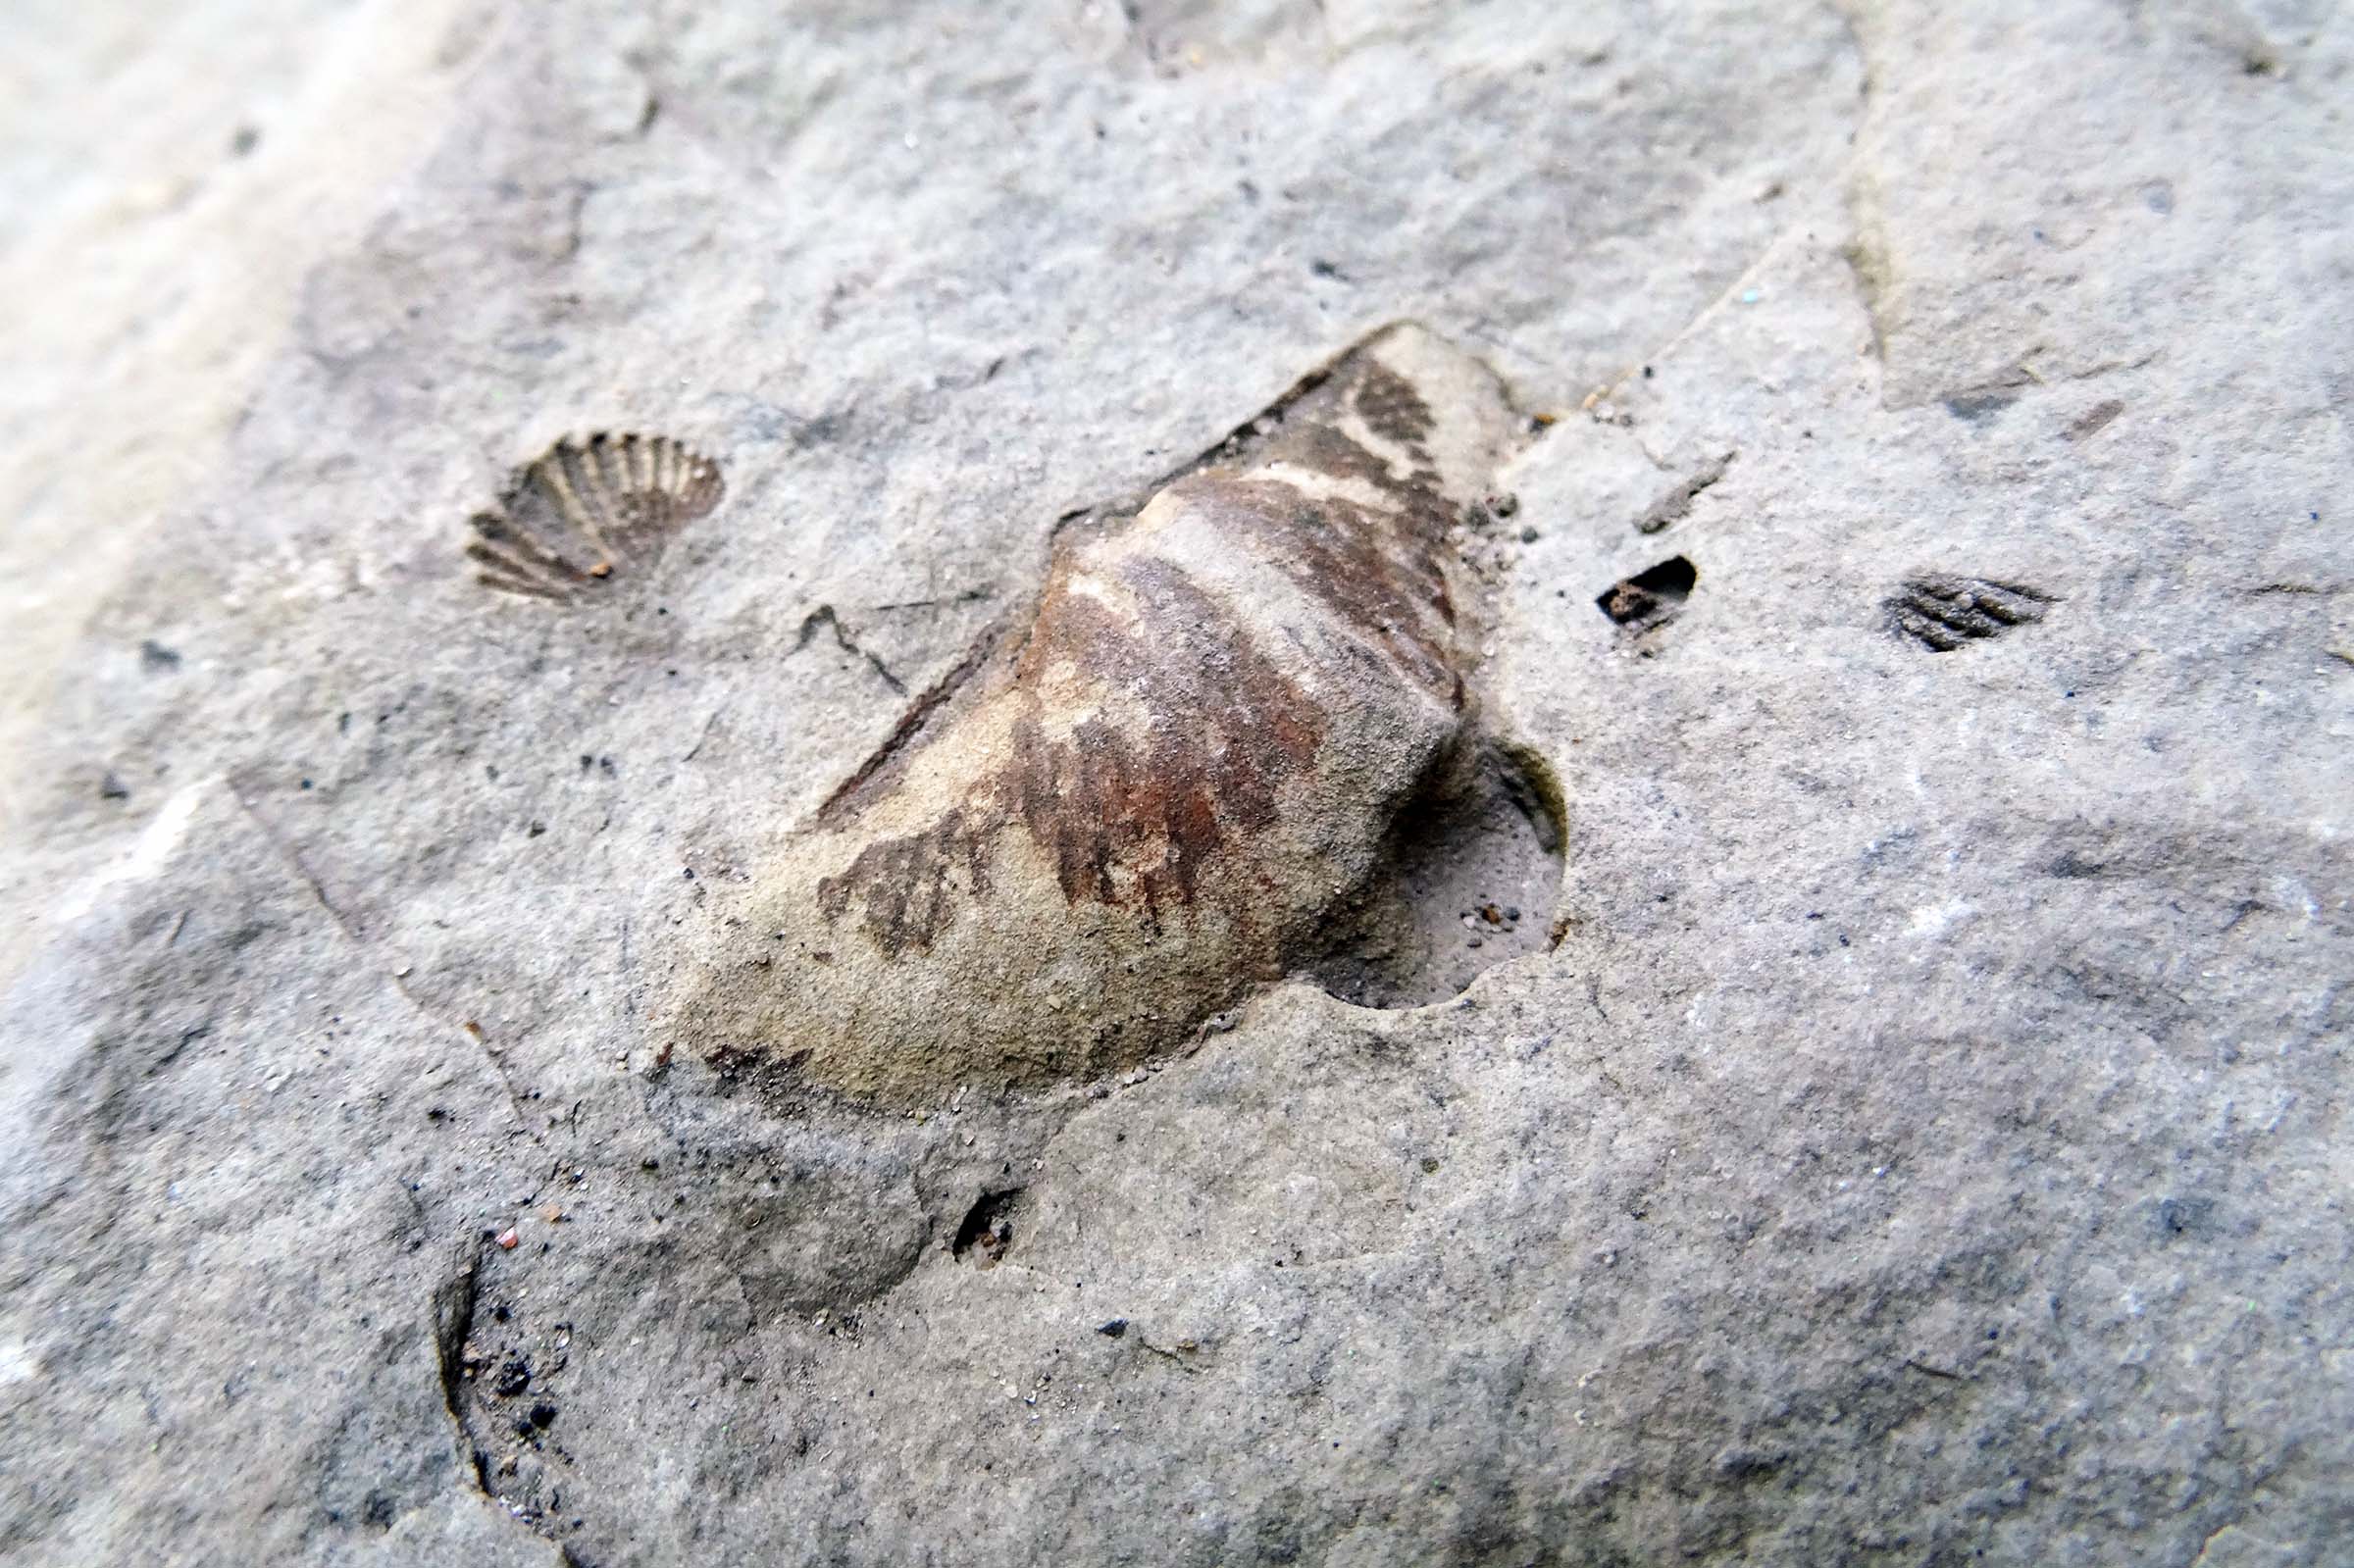 A rounded fossil shell protruding from the rock's surface. The fossil is curved and has ridges, as well as brown splotches. Nearby on the same rock surface is the indentation of a much small shell fossil.